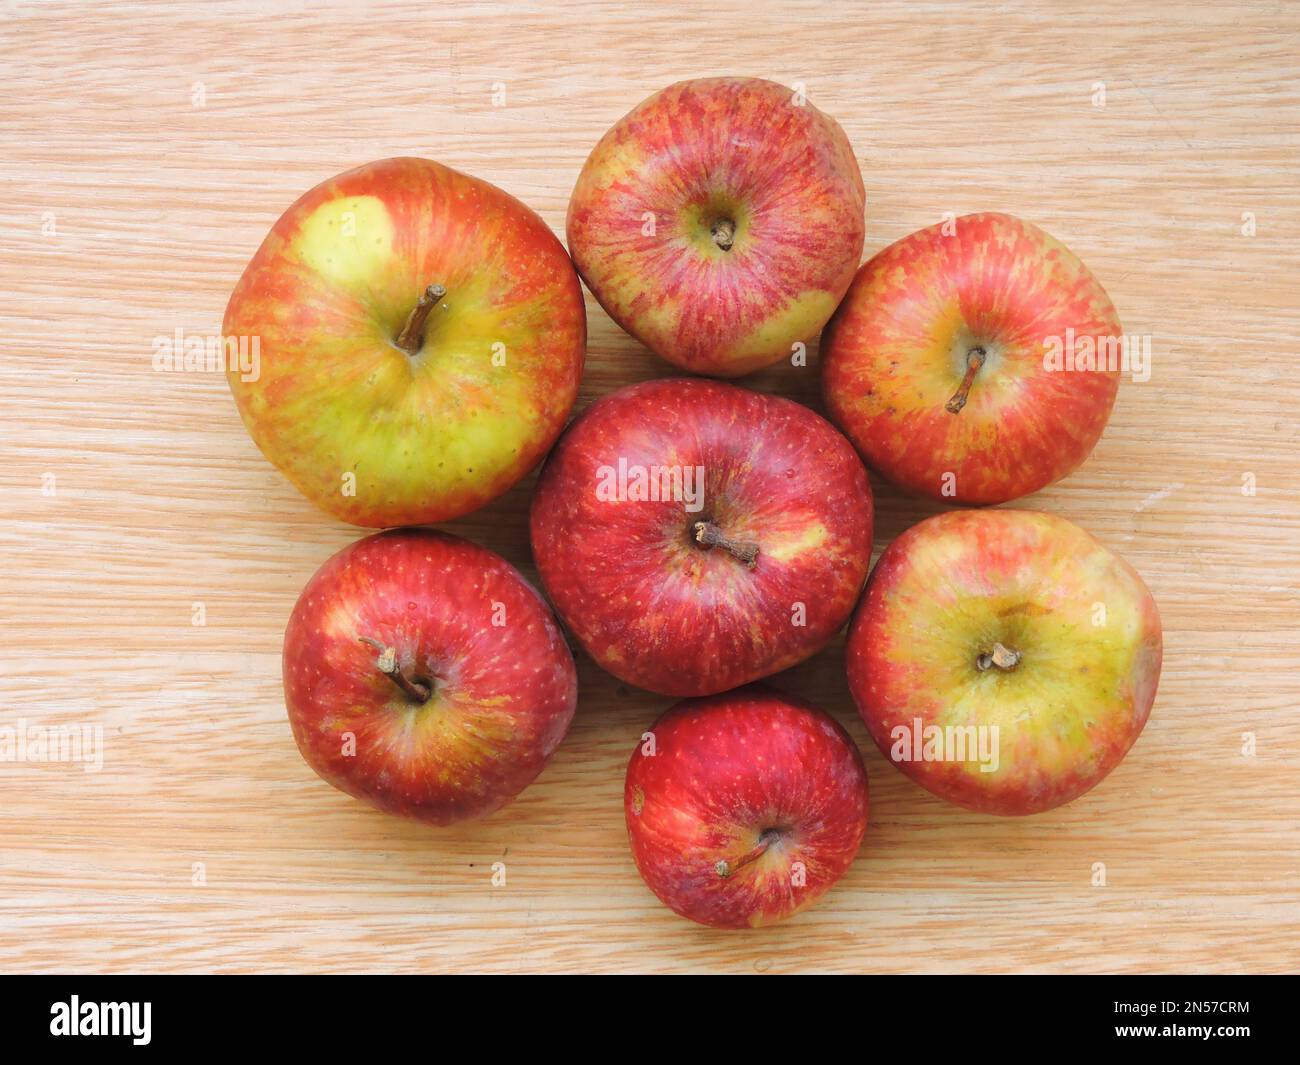 An apple is an edible fruit produced by an apple tree (Malus domestica). Apple trees are cultivated worldwide and are the most widely grown species. Stock Photo